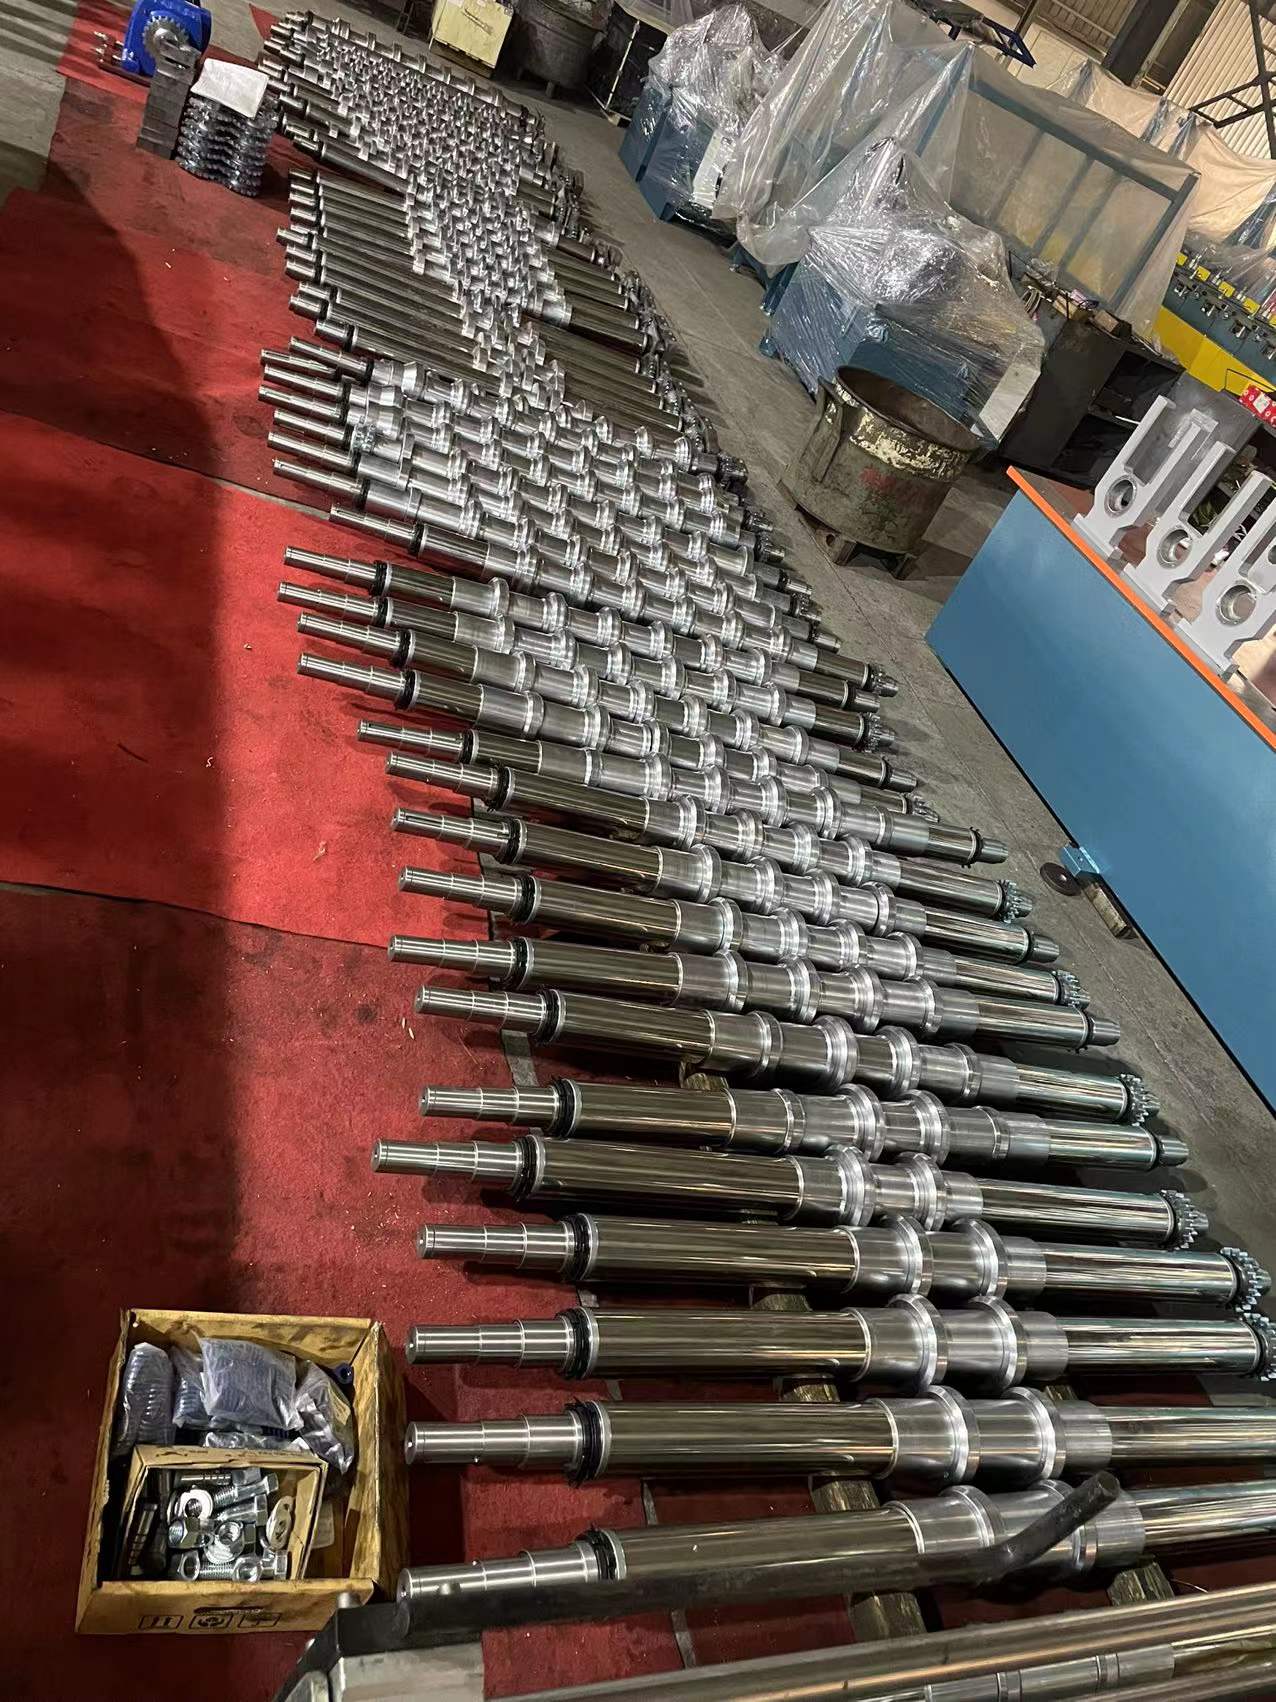 Zhongyuan assembly of rollers and shafts